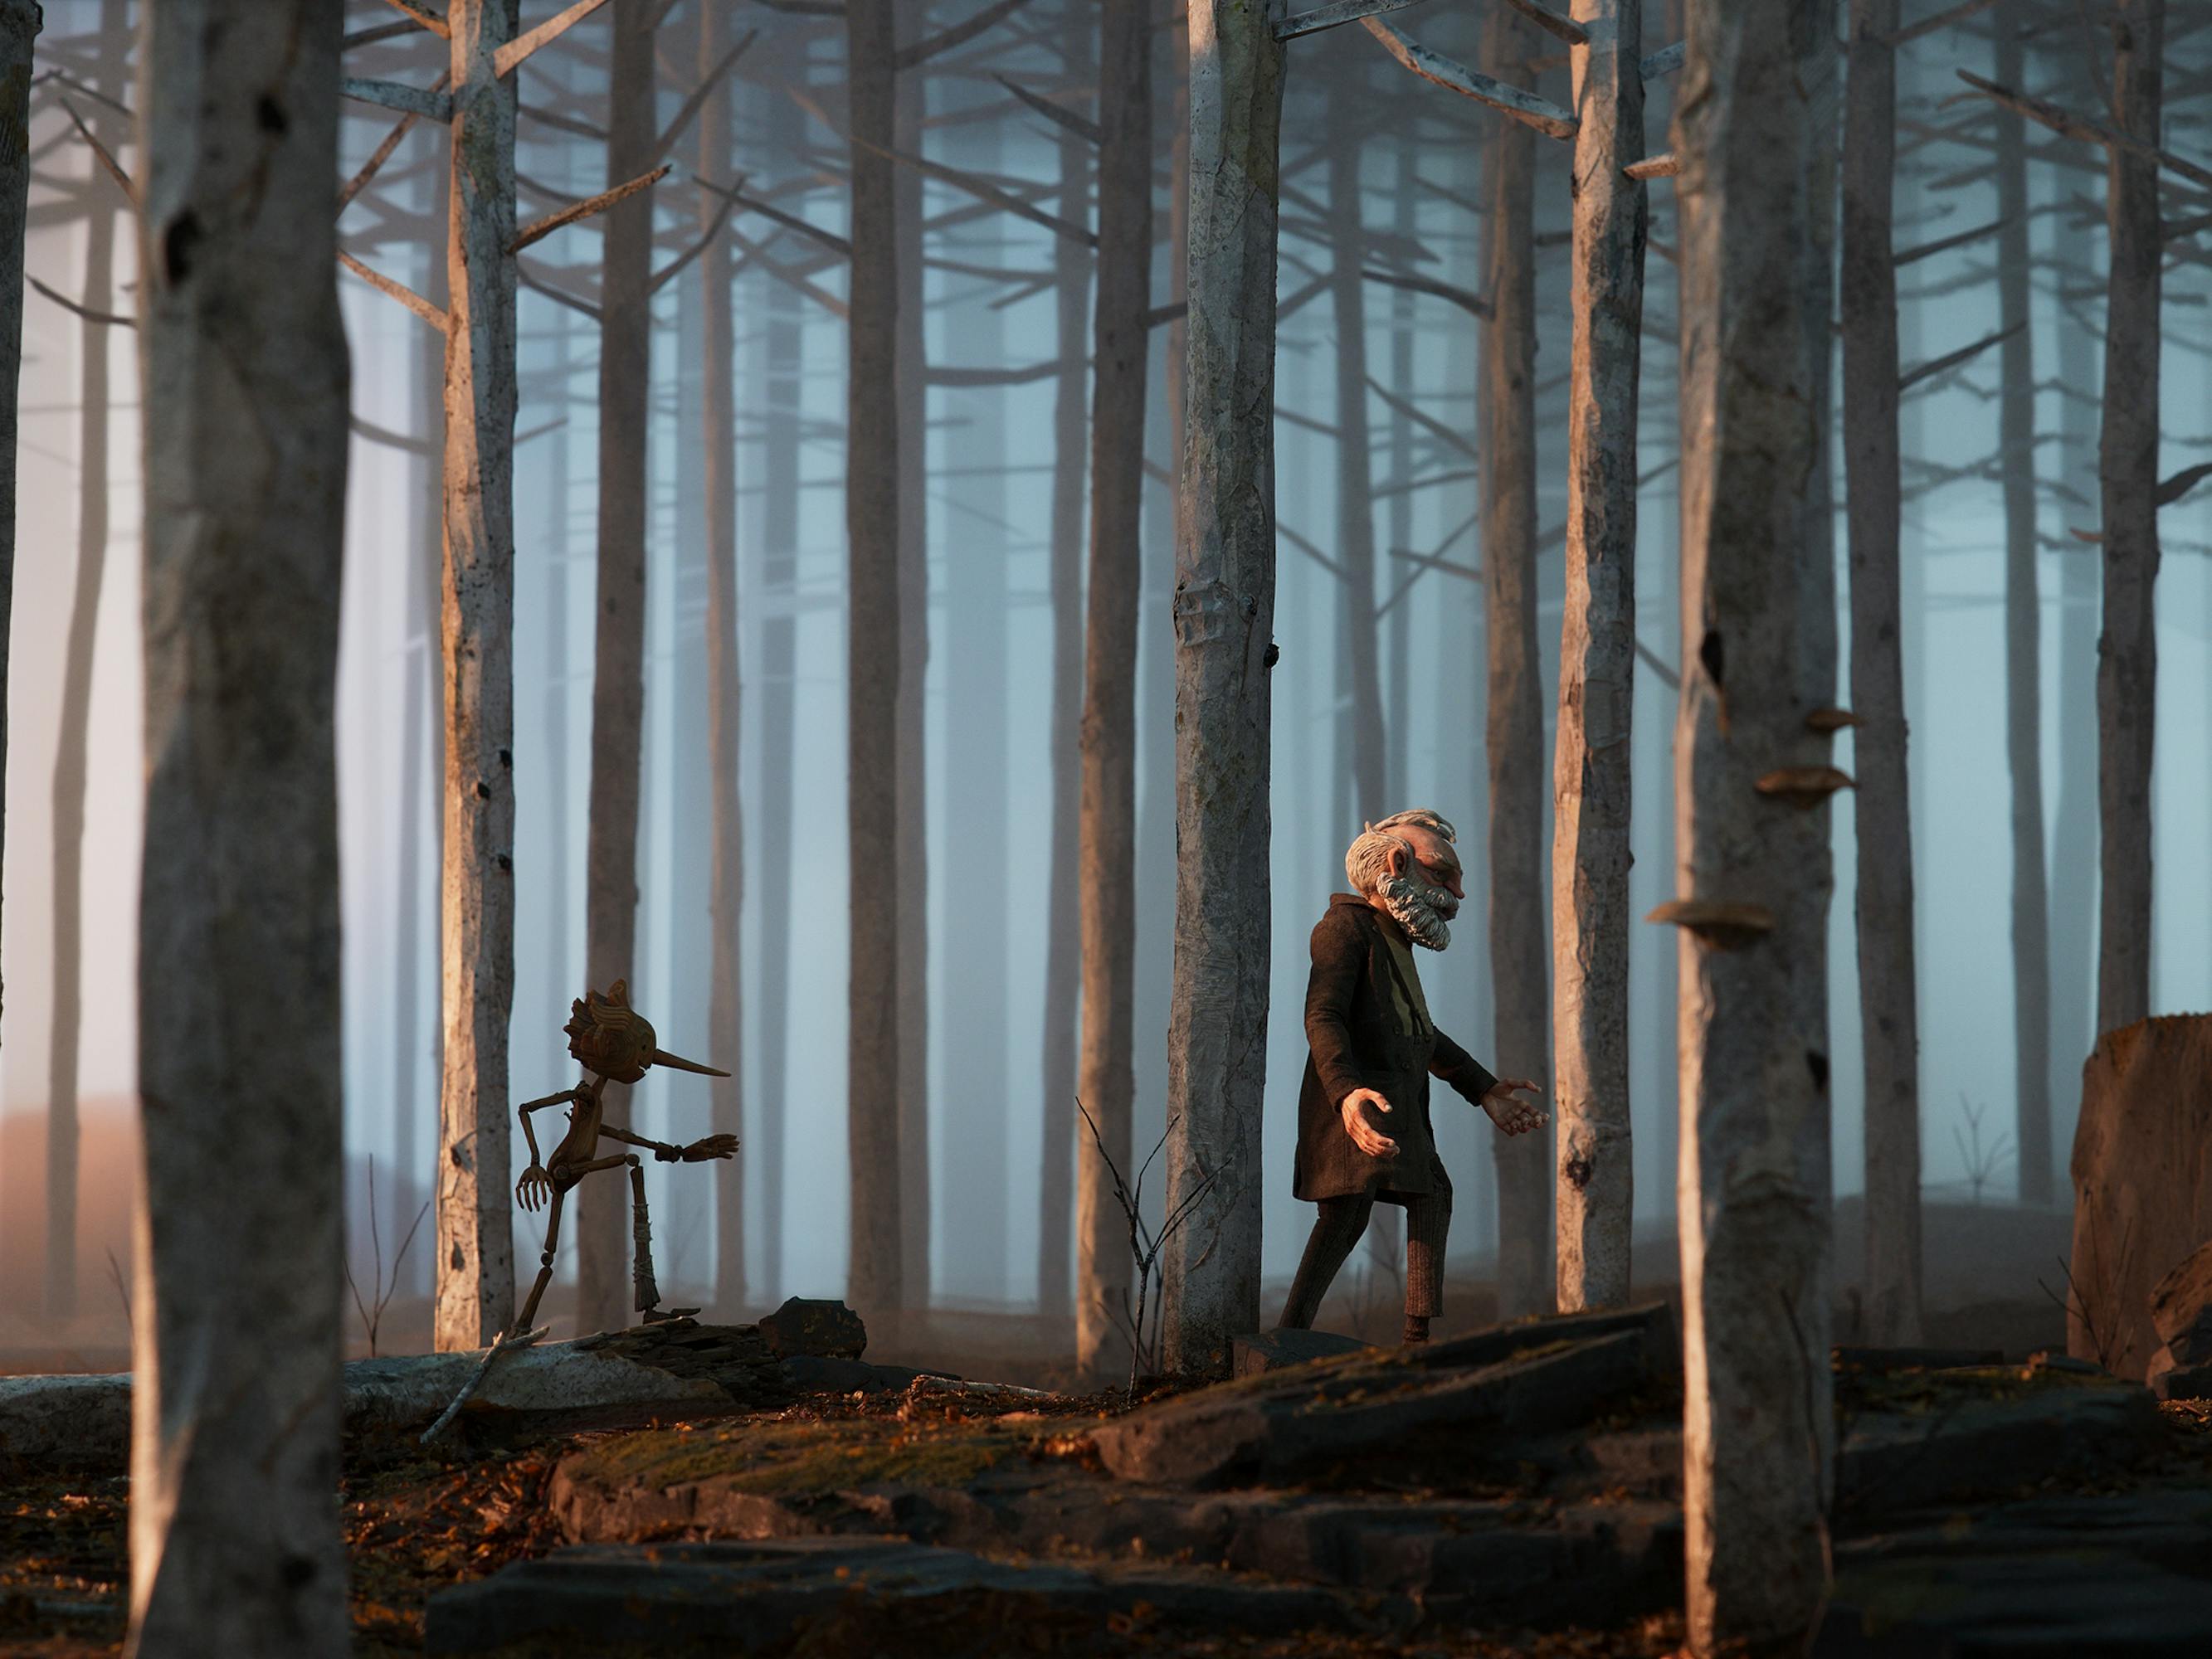 Pinocchio (Gregory Mann) and Geppetto (David Bradley) walk through a misty forest. 